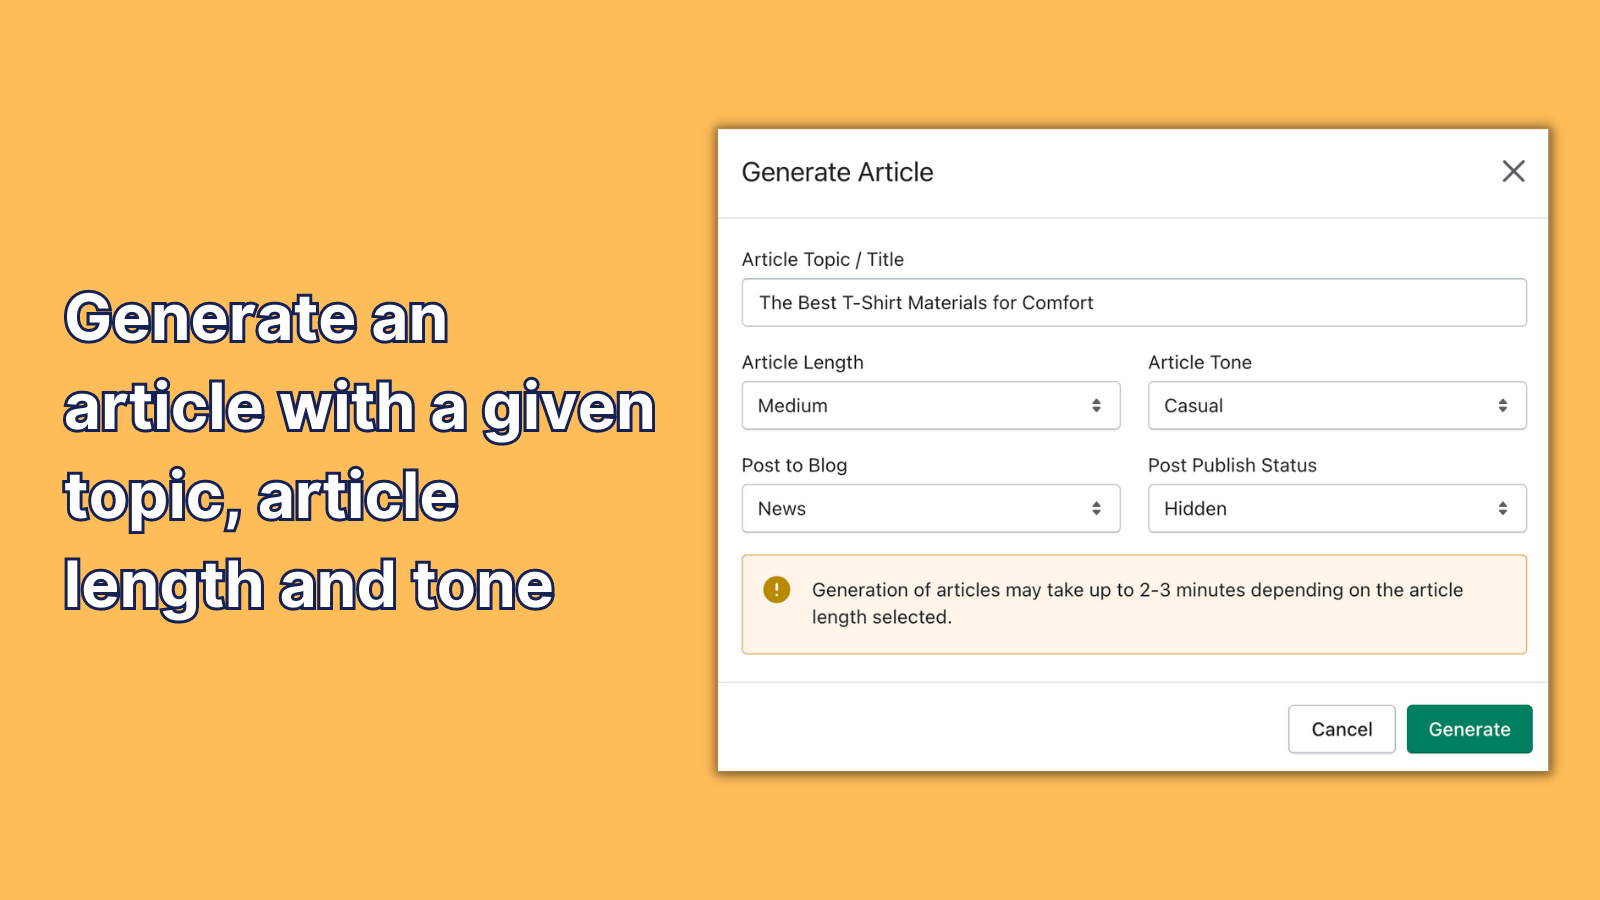 Generate an article with a given topic, length and tone